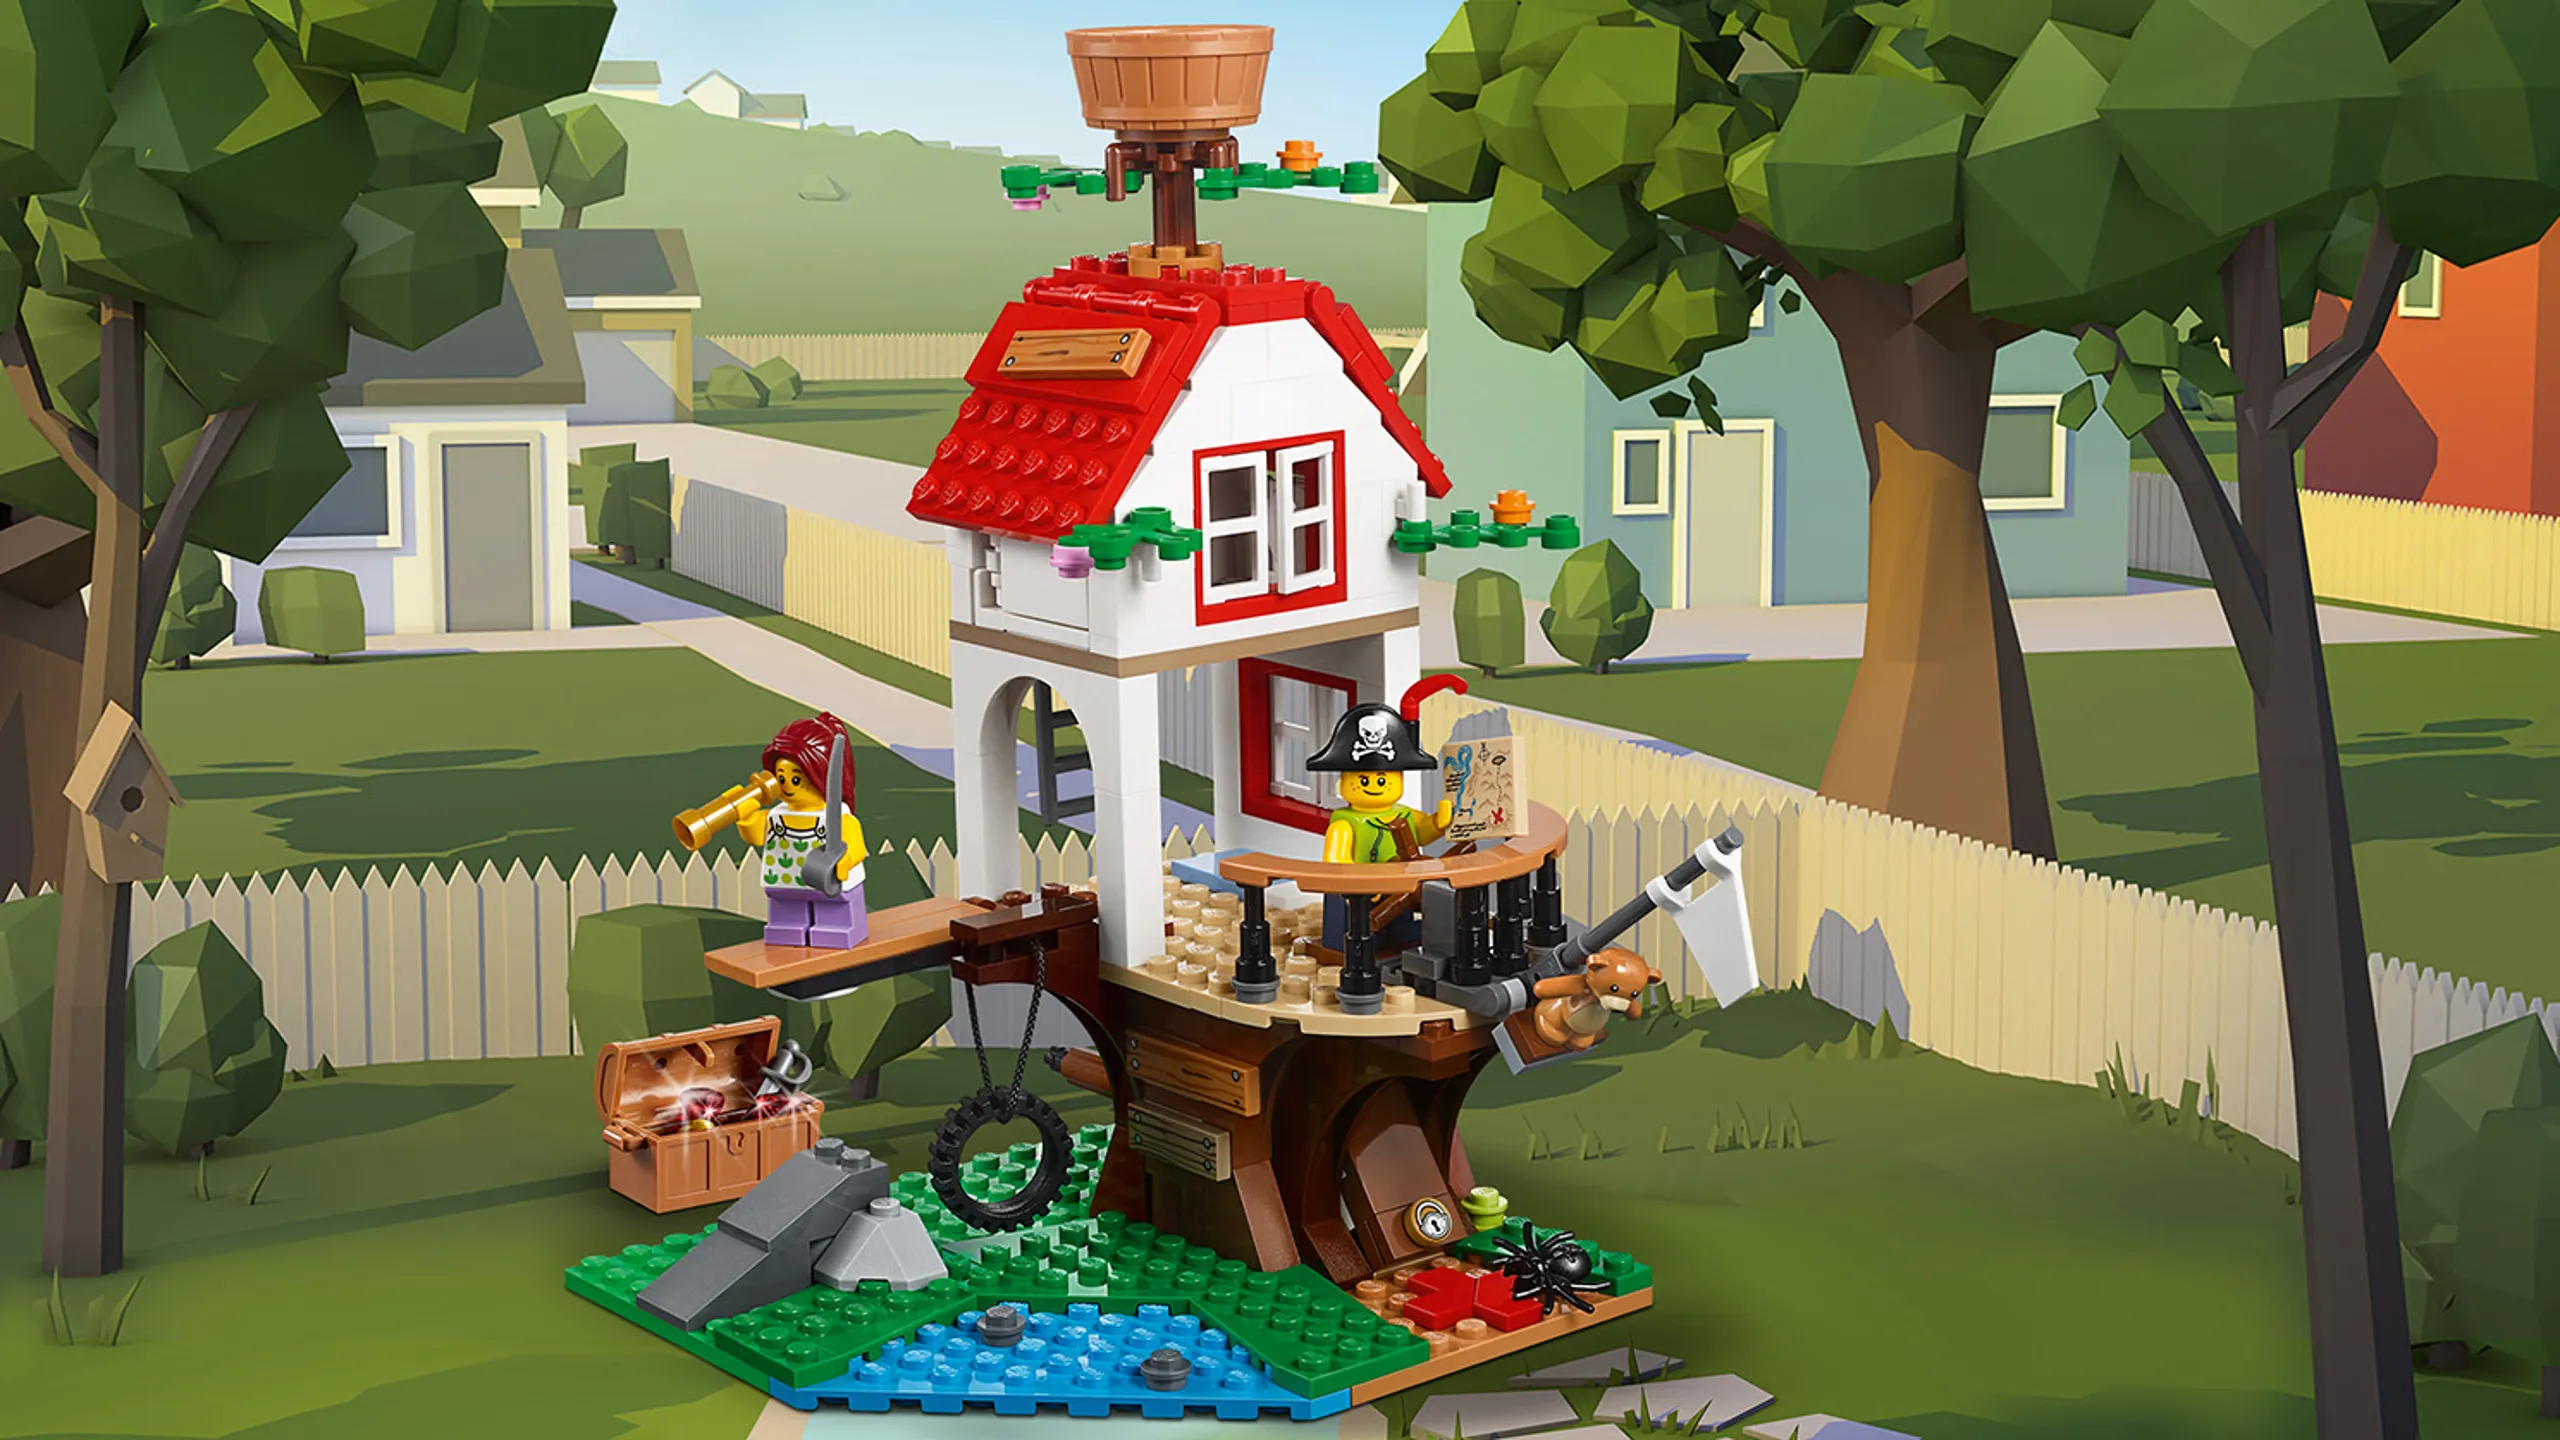 LEGO Creator 3 in 1 - 31078 Tree house Adventures - Build a fun pirate themed tree house with a treasure map, treasure chest, a crow's nest and place to walk the plank.